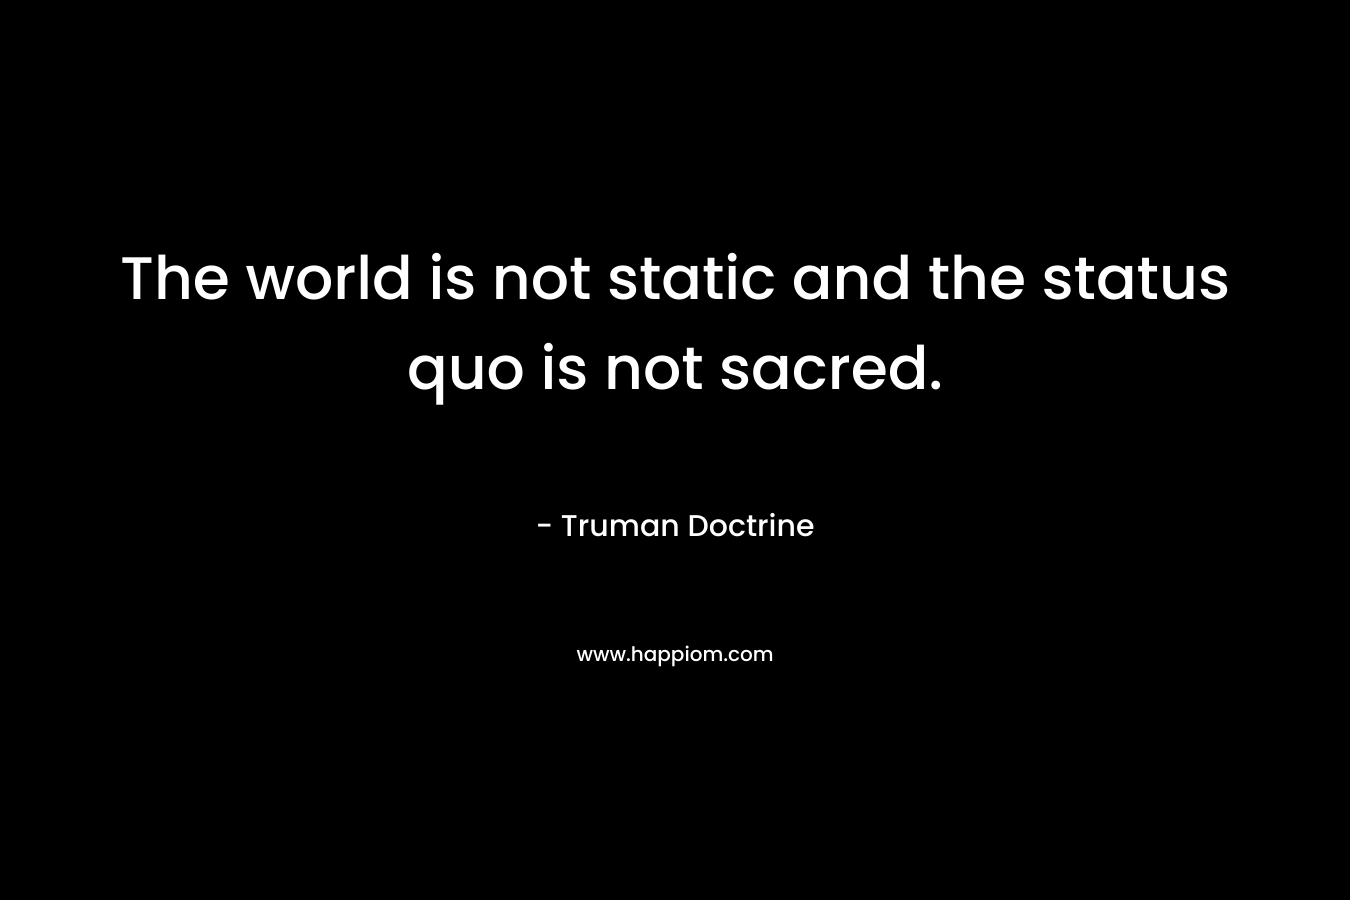 The world is not static and the status quo is not sacred. – Truman Doctrine